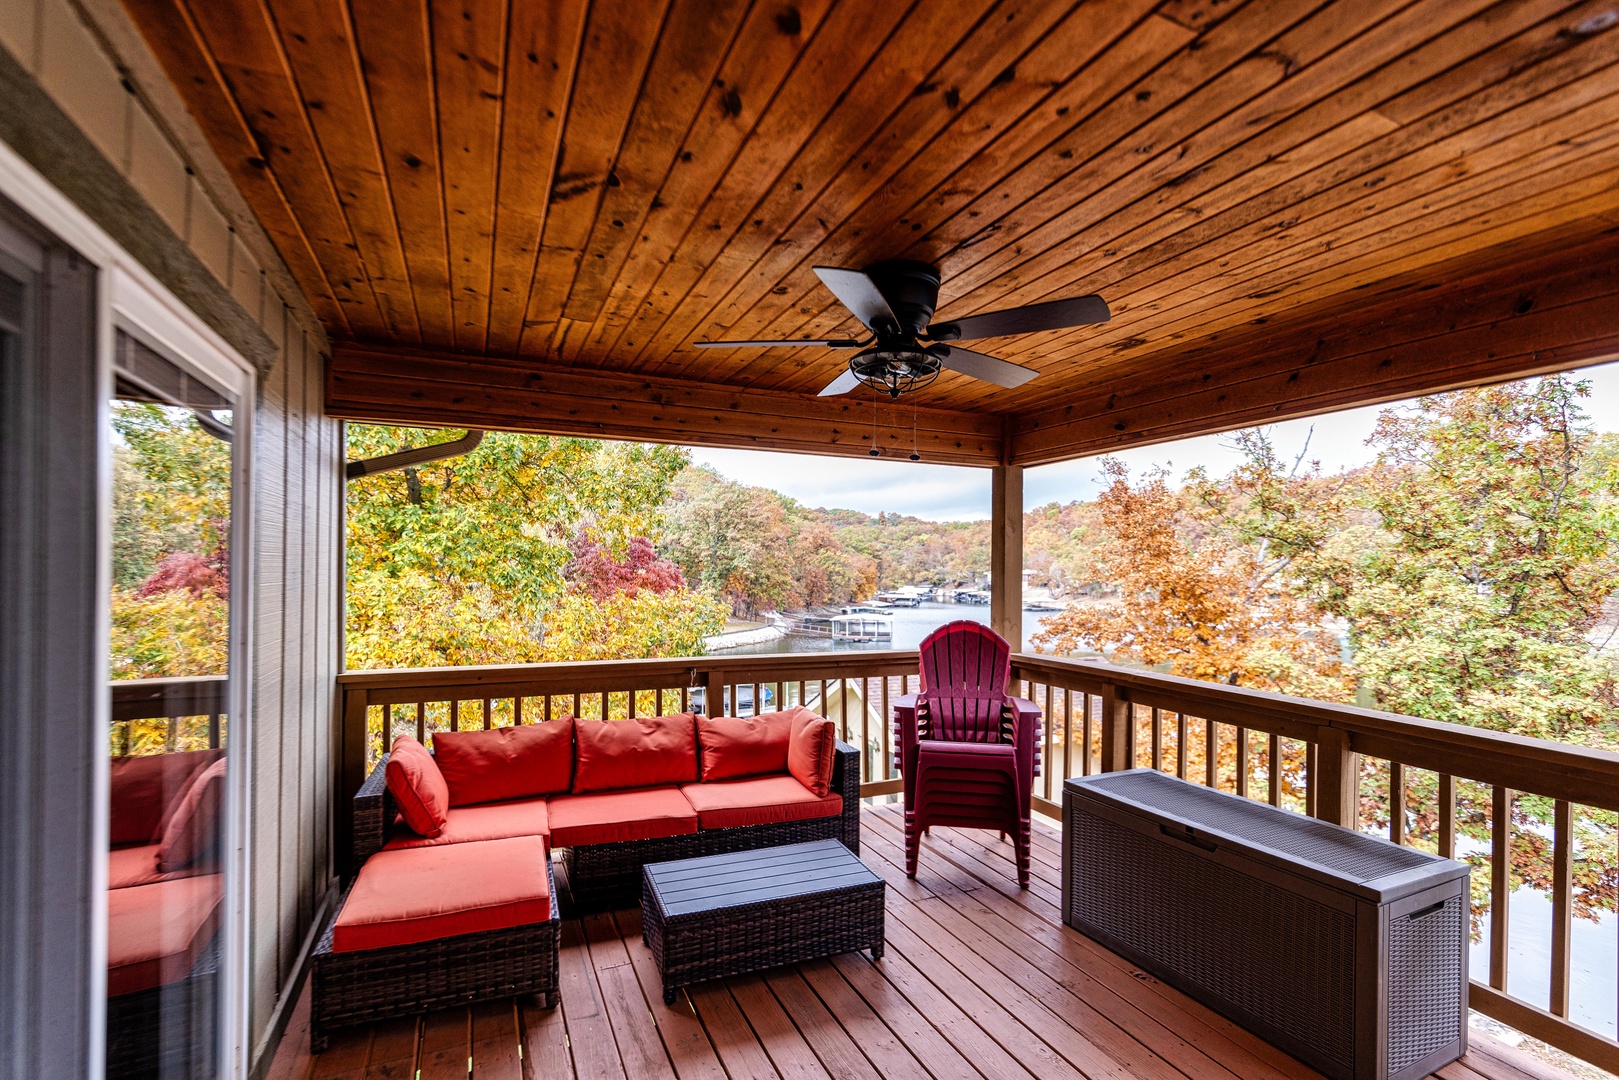 Lounge the day away with gorgeous lake views on the deck